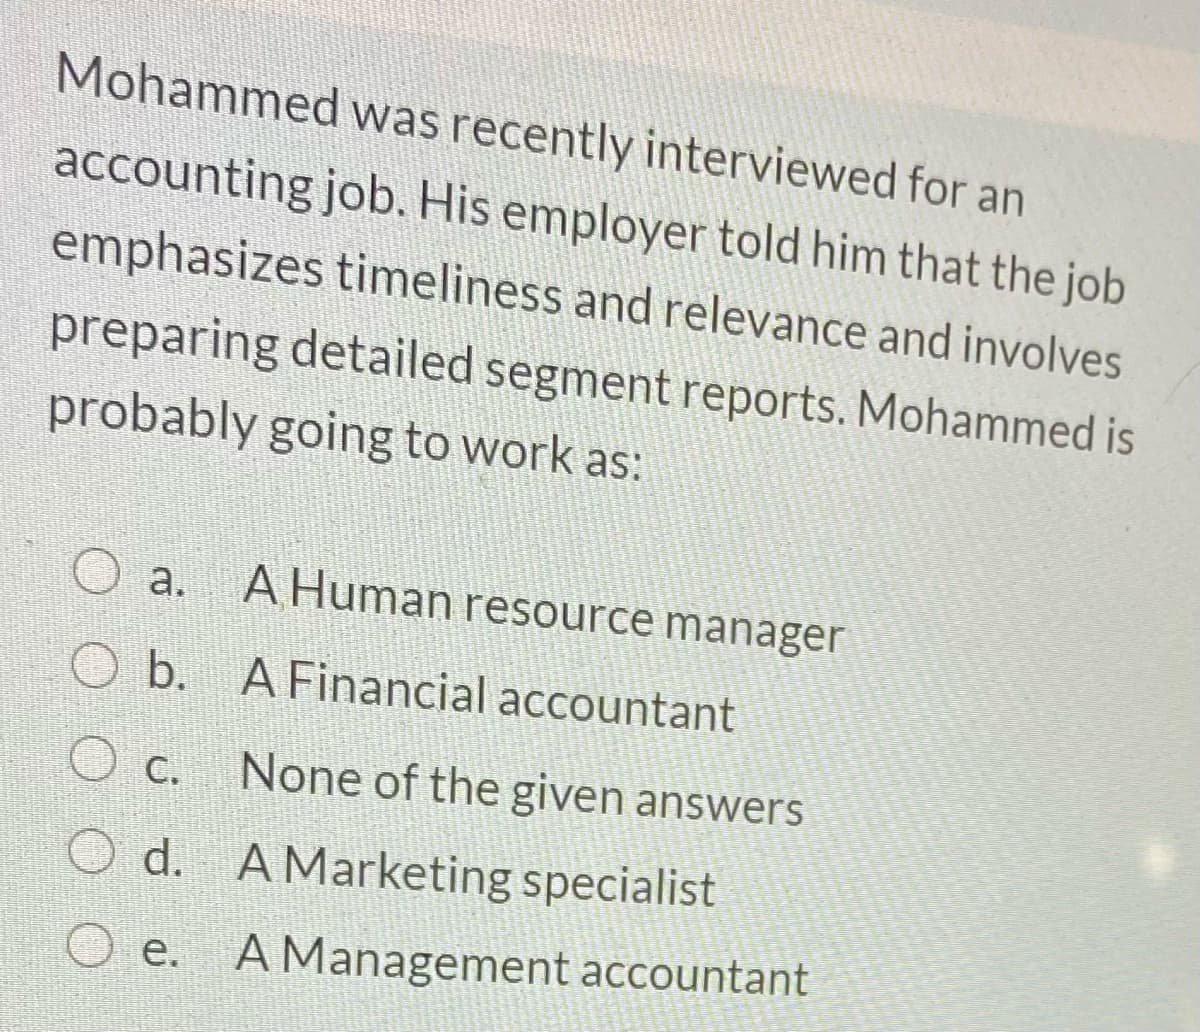 Mohammed was recently interviewed for an
accounting job. His employer told him that the job
emphasizes timeliness and relevance and involves
preparing detailed segment reports. Mohammed is
probably going to work as:
а.
A Human resource manager
O b. A Financial accountant
O c. None of the given answers
O d. A Marketing specialist
O e. A Management accountant
